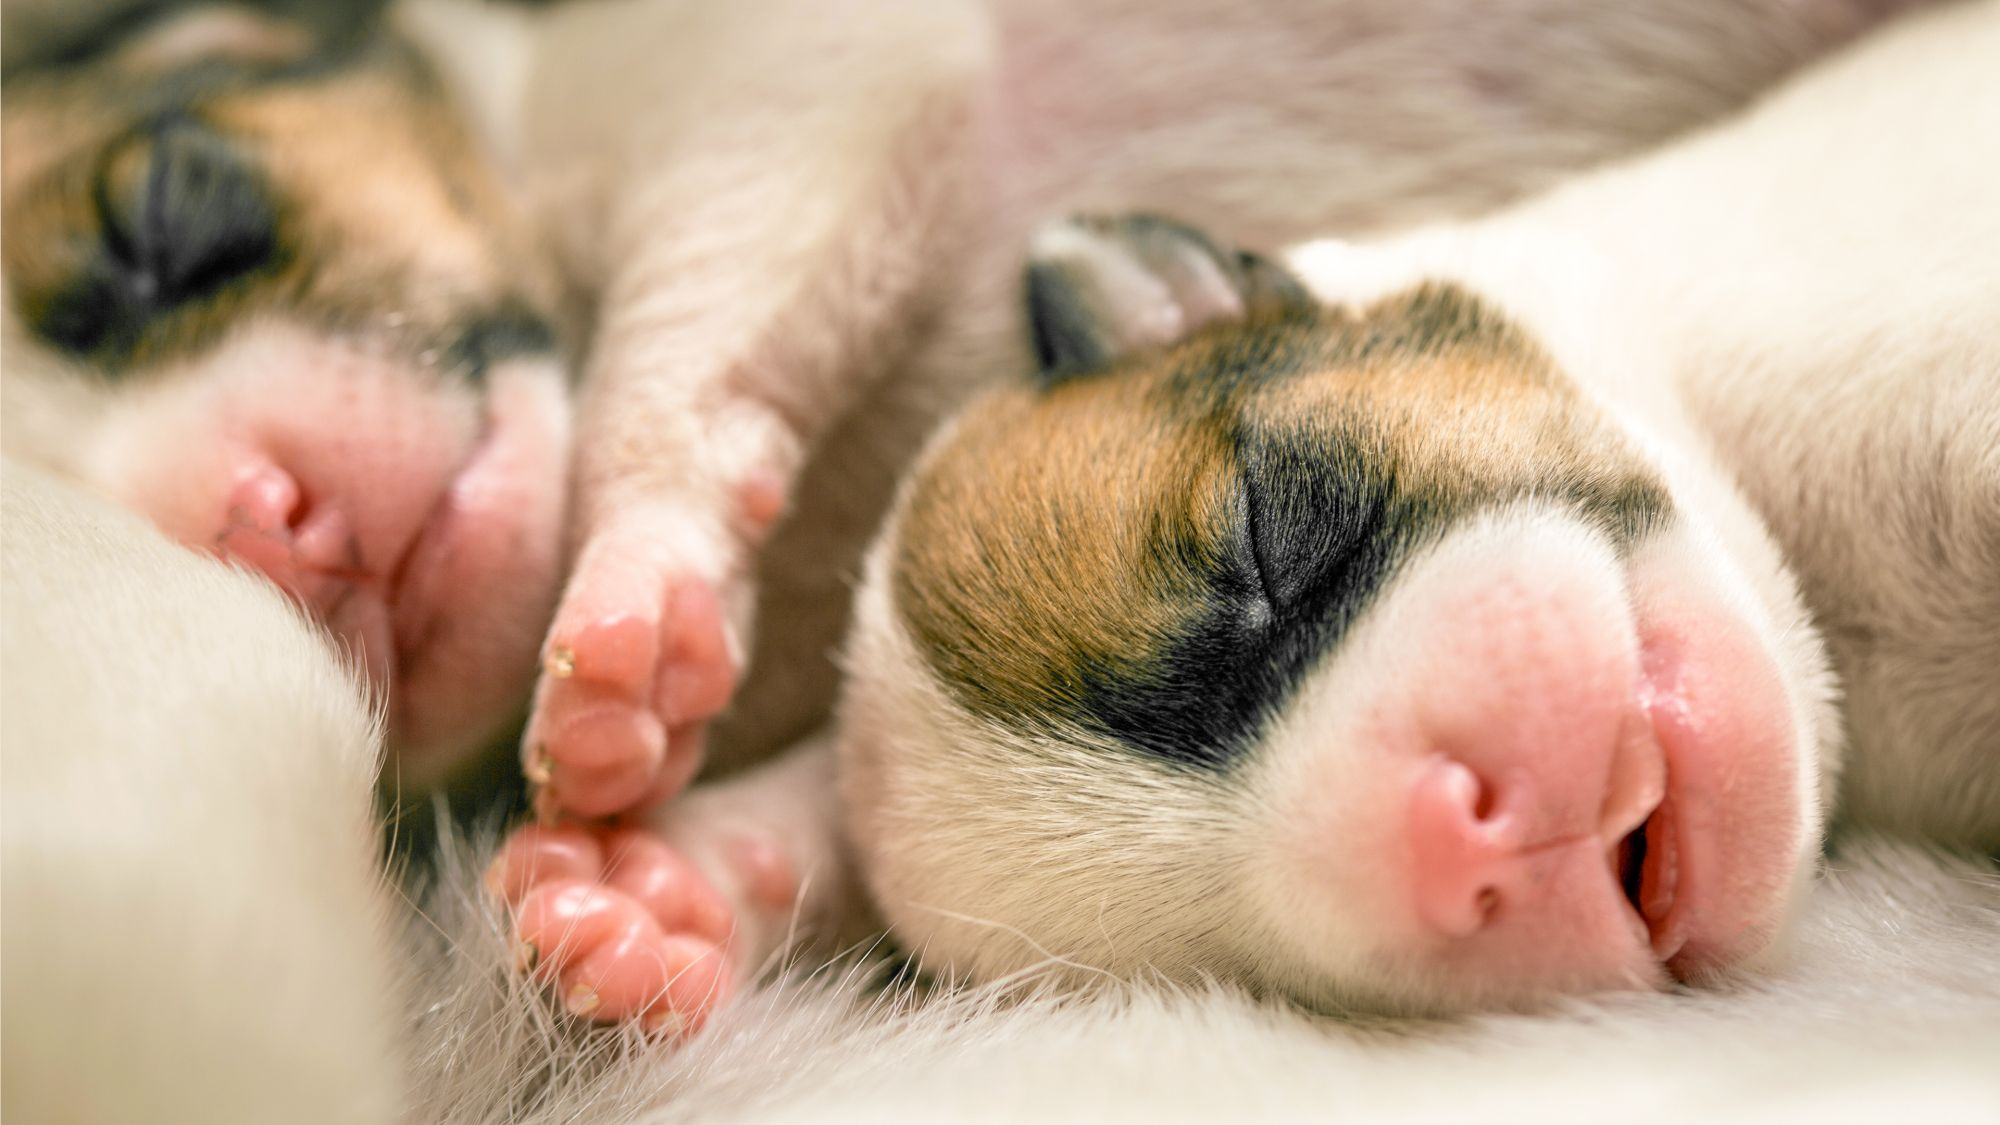 Newborn Jack Russell Terrier puppies sleeping next to each other